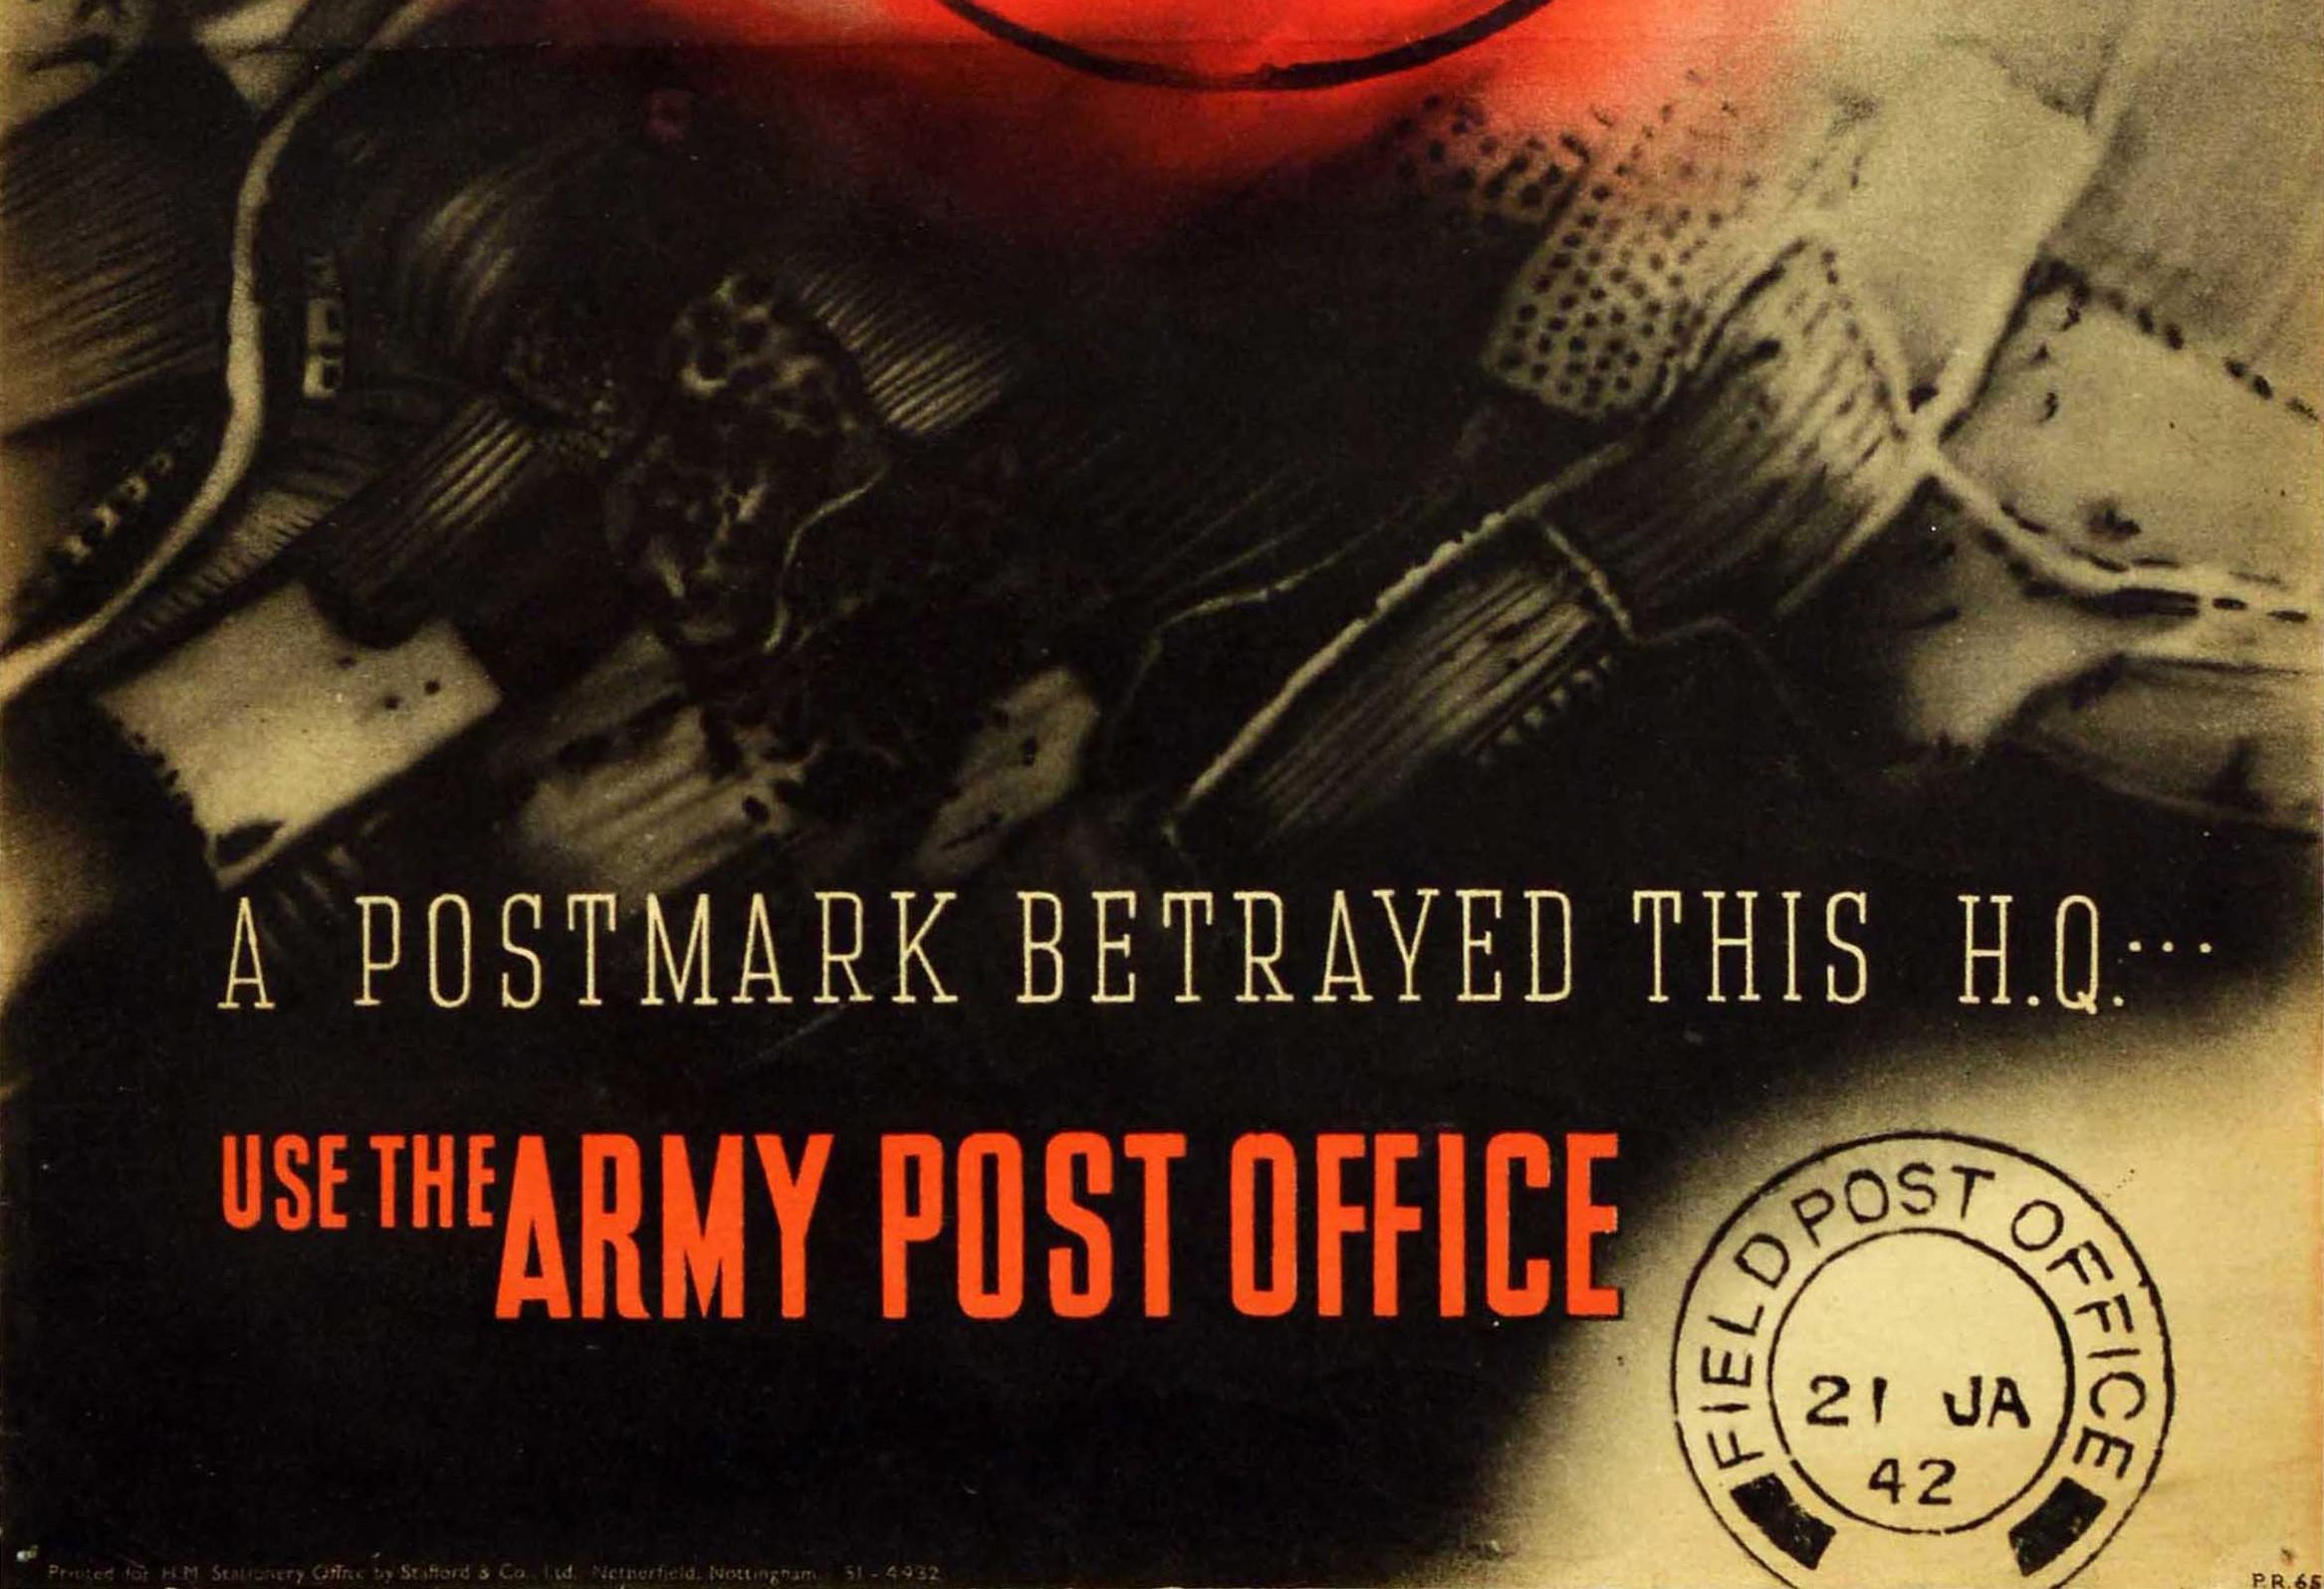 British Original Vintage War Poster Postmark Betrayed HQ Army Post Office WWII Modernism For Sale